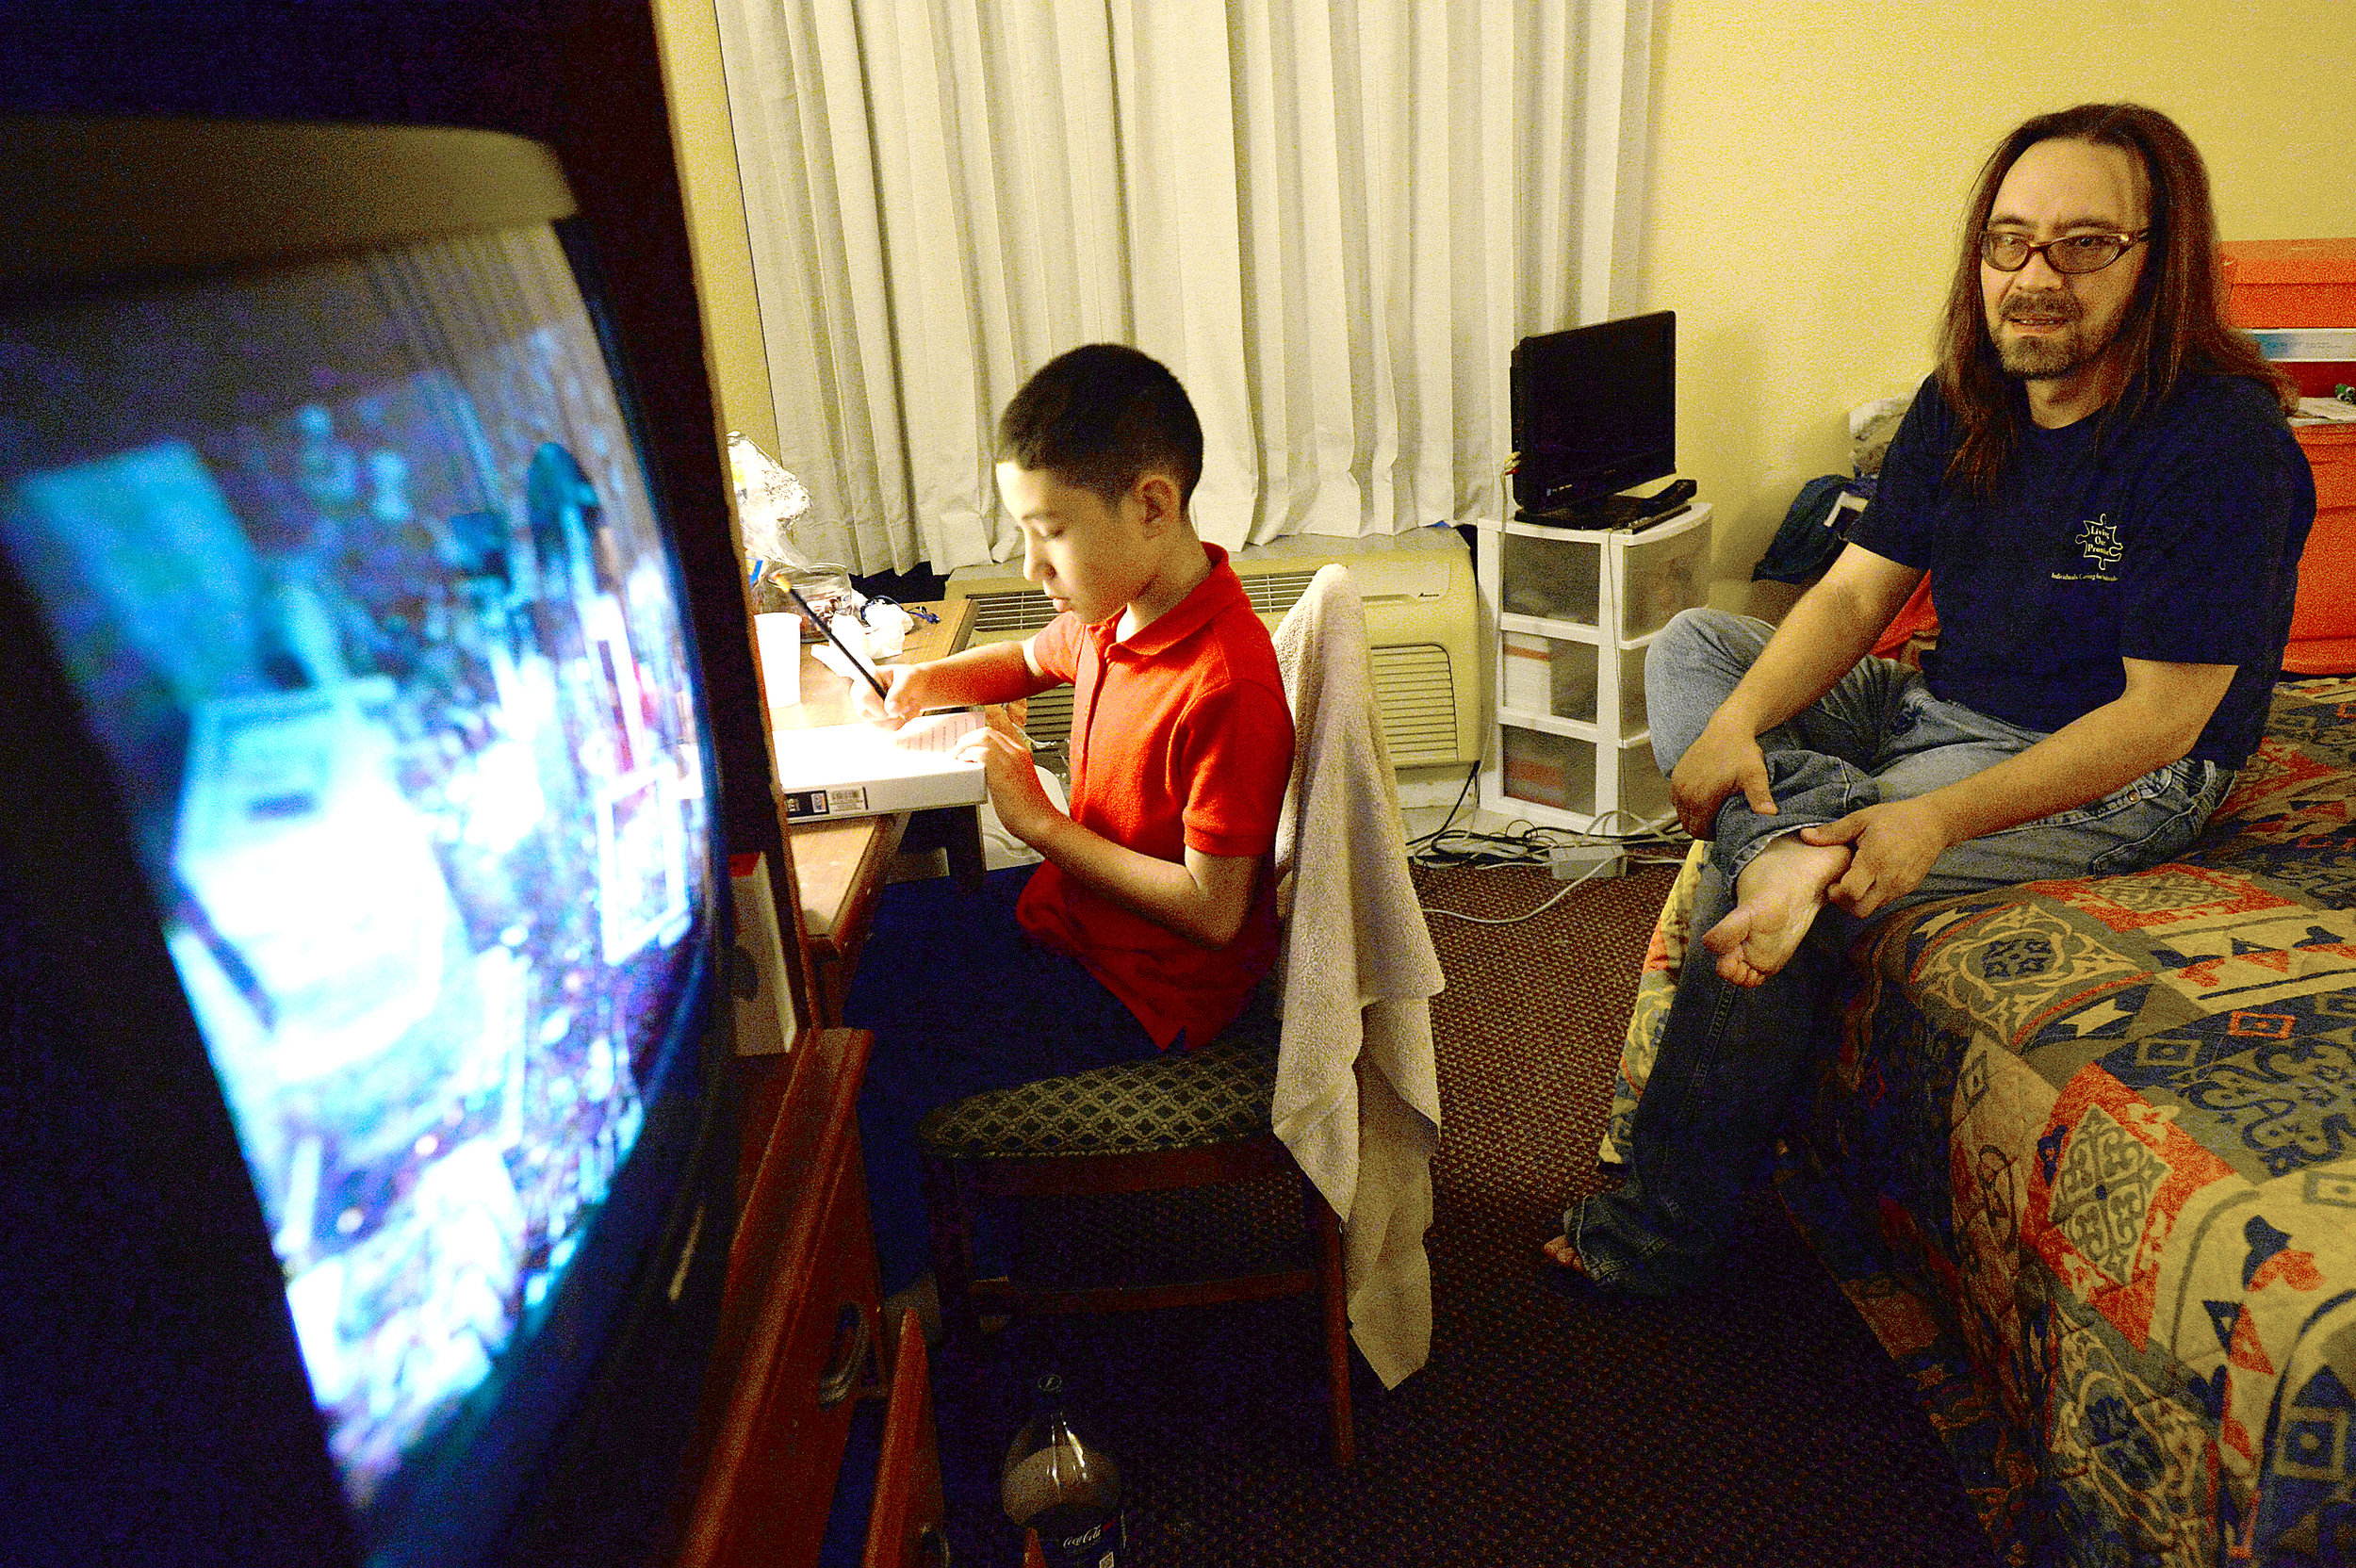  Steven Kaufman watches television while his son Stevie does homework at their hotel room in the Beaumont Lodge. The family have been staying there on a FEMA voucher after evacuating their flooded home 3 weeks ago.
Photo taken Wednesday, September 27